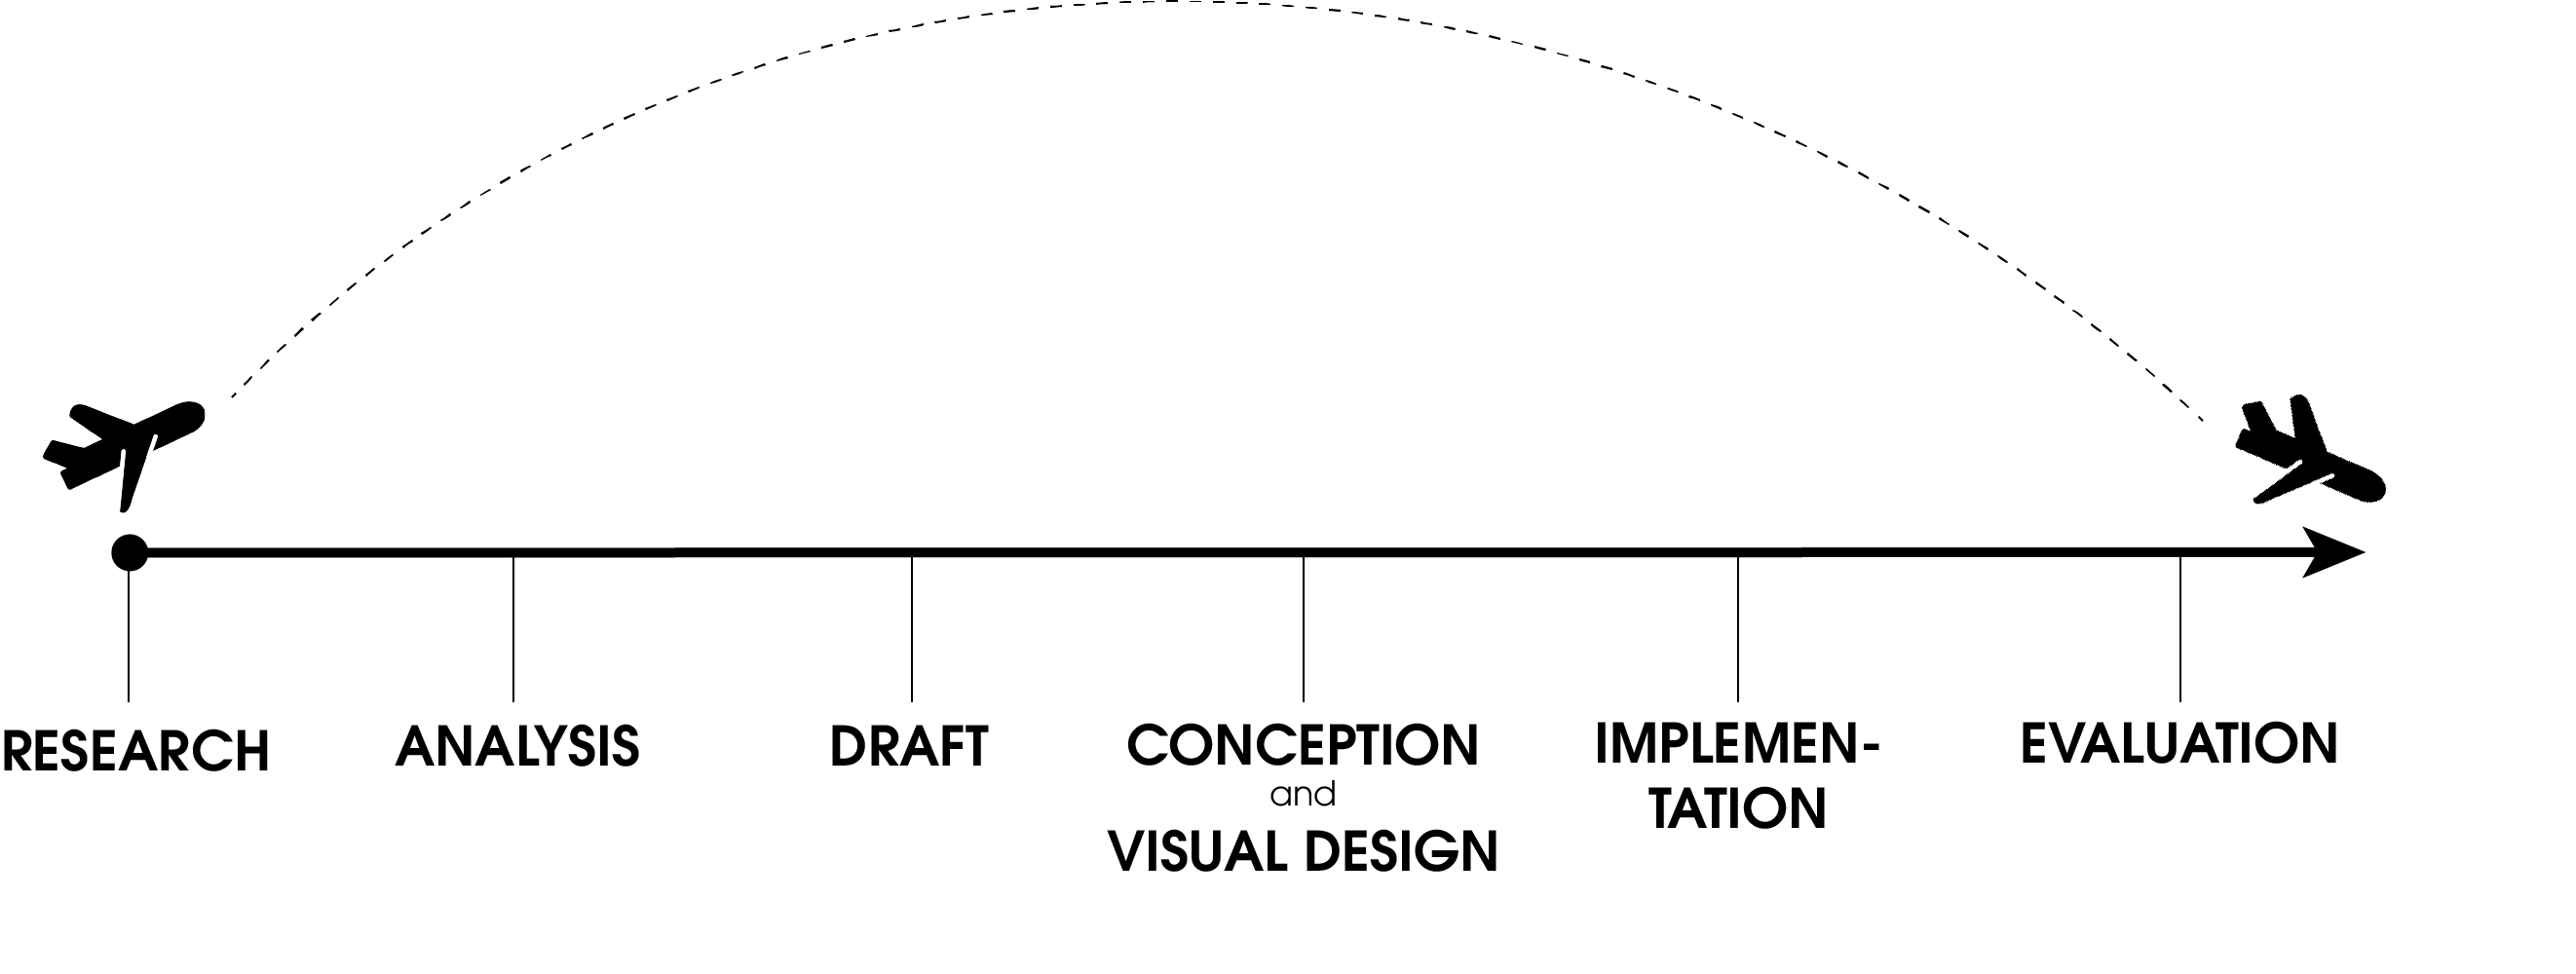 Representation of the design phases of the UX process in the form of a timeline. At the beginning of the timeline is the research. This is followed by the points of analysis, design, conception and virtual design, and implementation. The process is concluded with the evaluation.